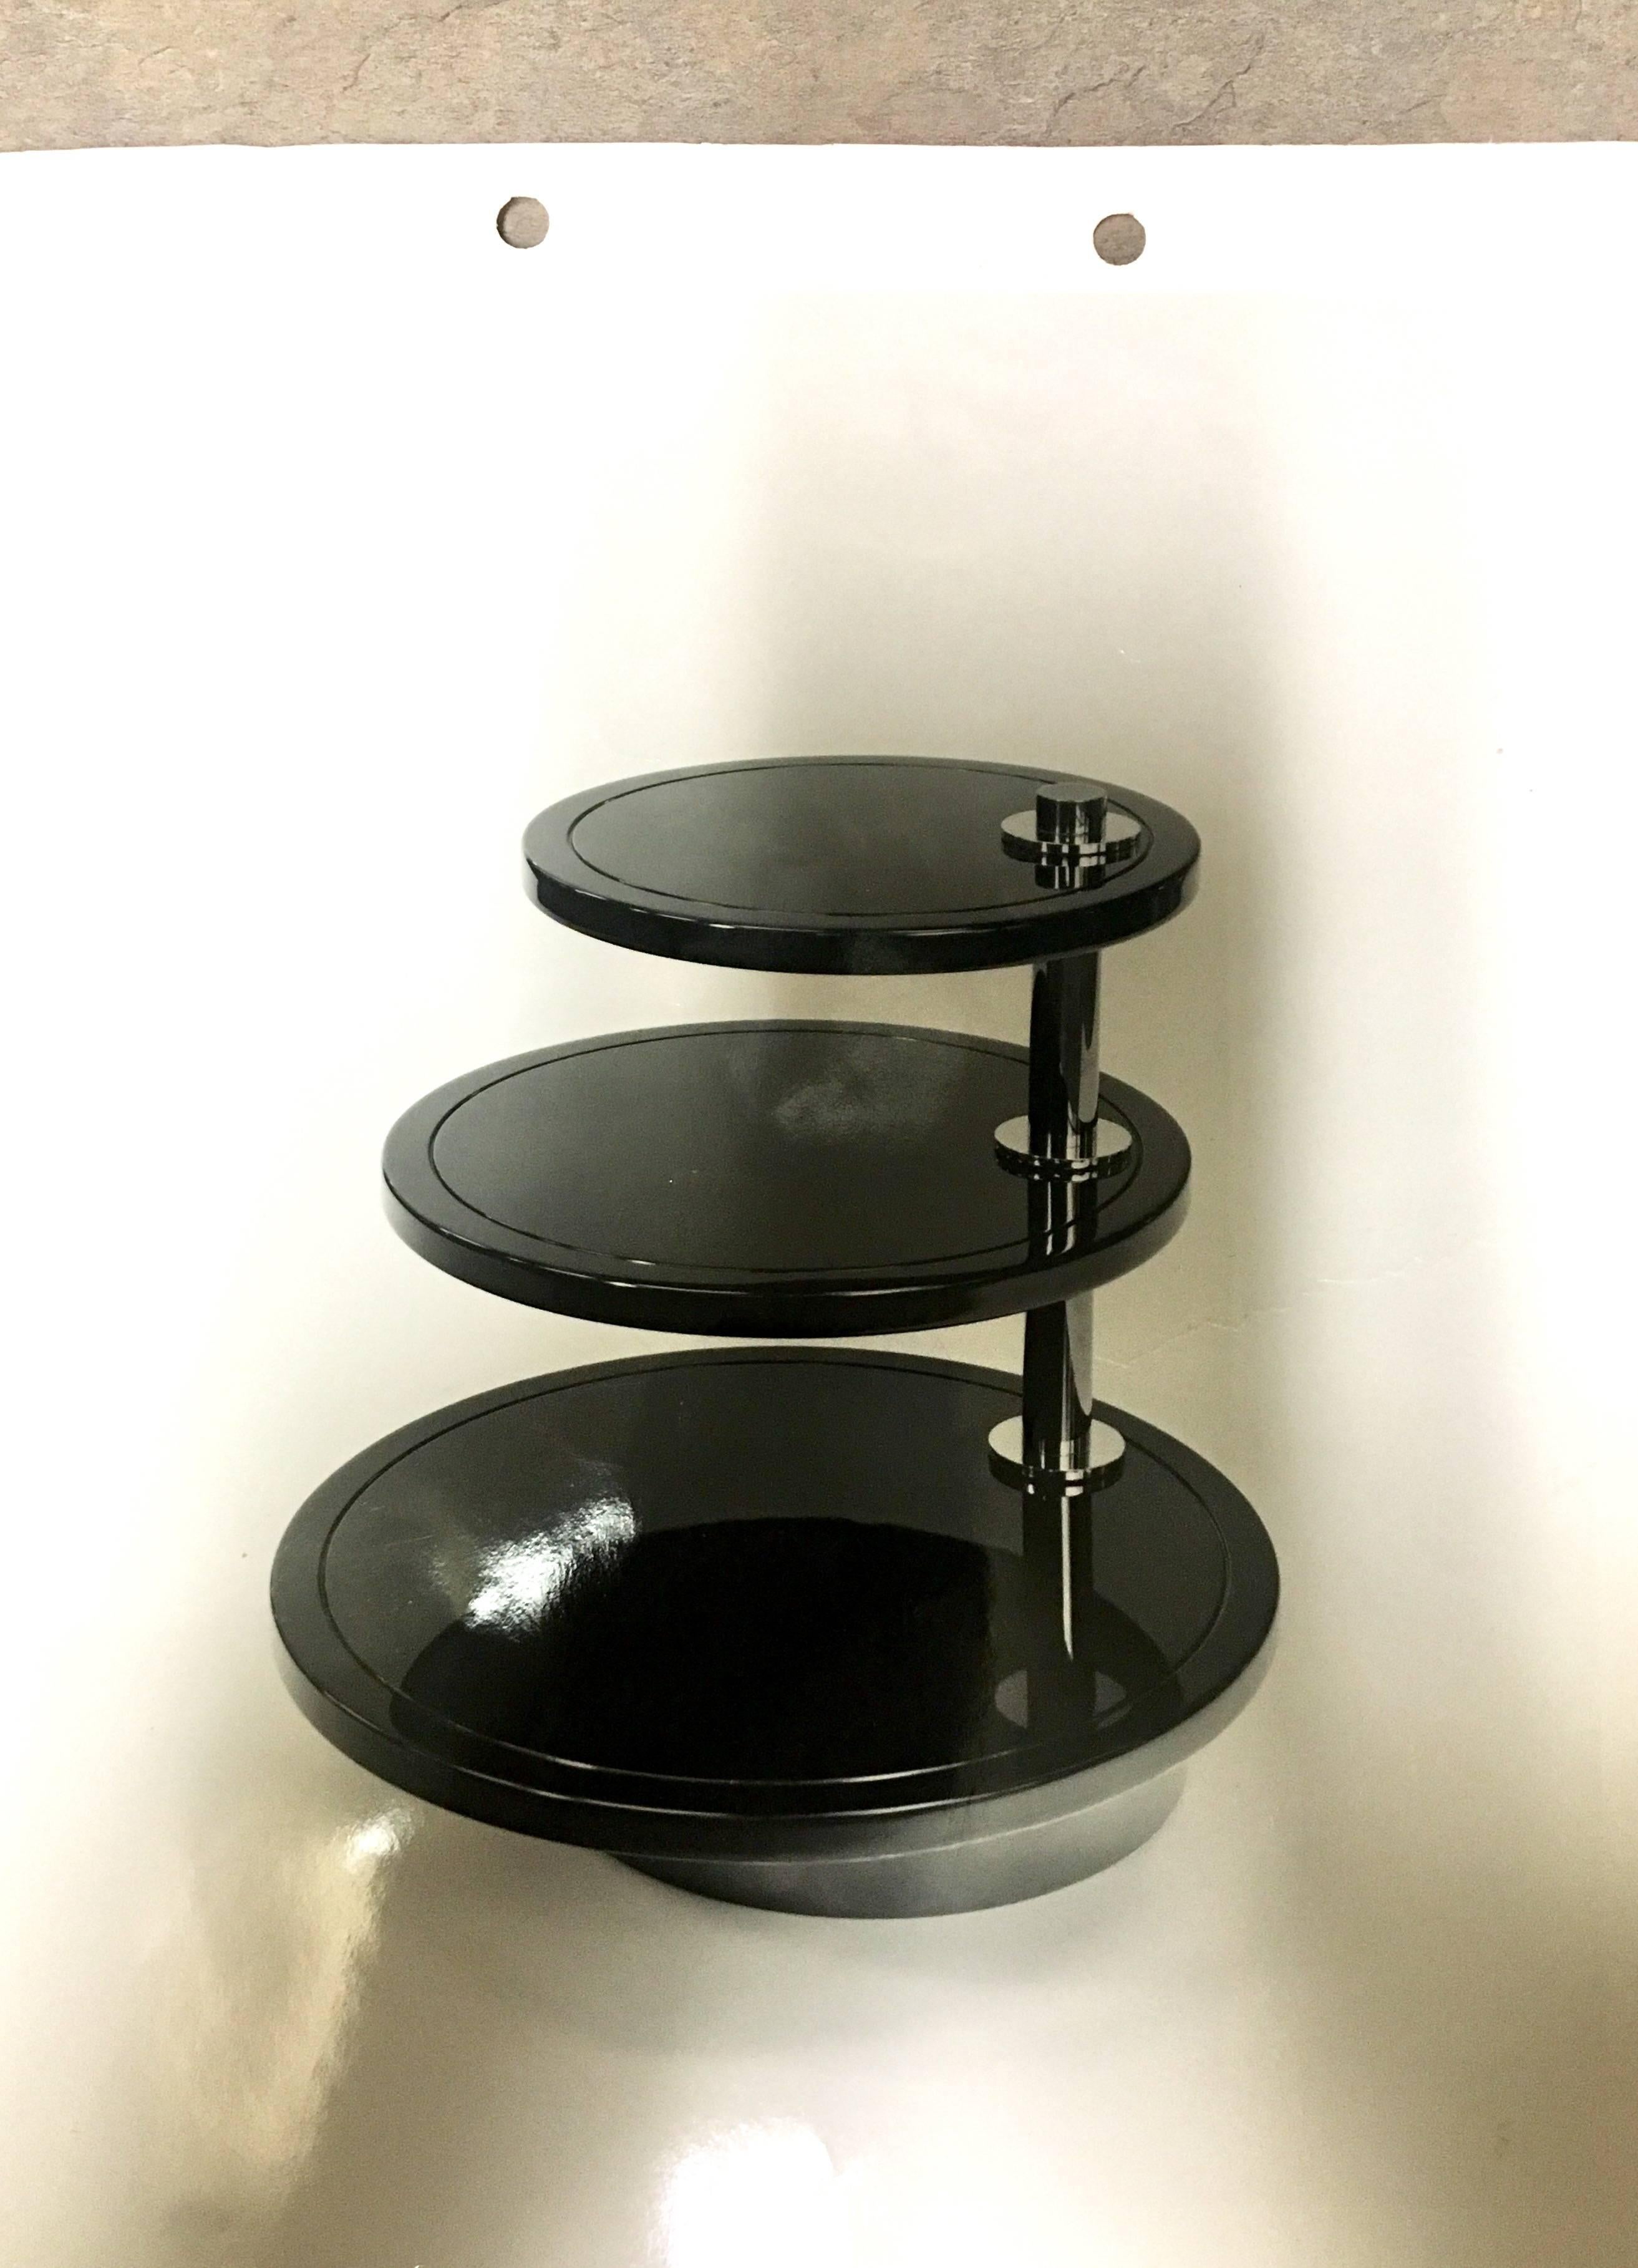 A rare custom order three-tier cocktail table by Robert Metzger with original paperwork manufactured in 1980. The table consists of three beige lacquer finish discs with a chrome pole and brass accents; the discs are rotatory table tops and can be